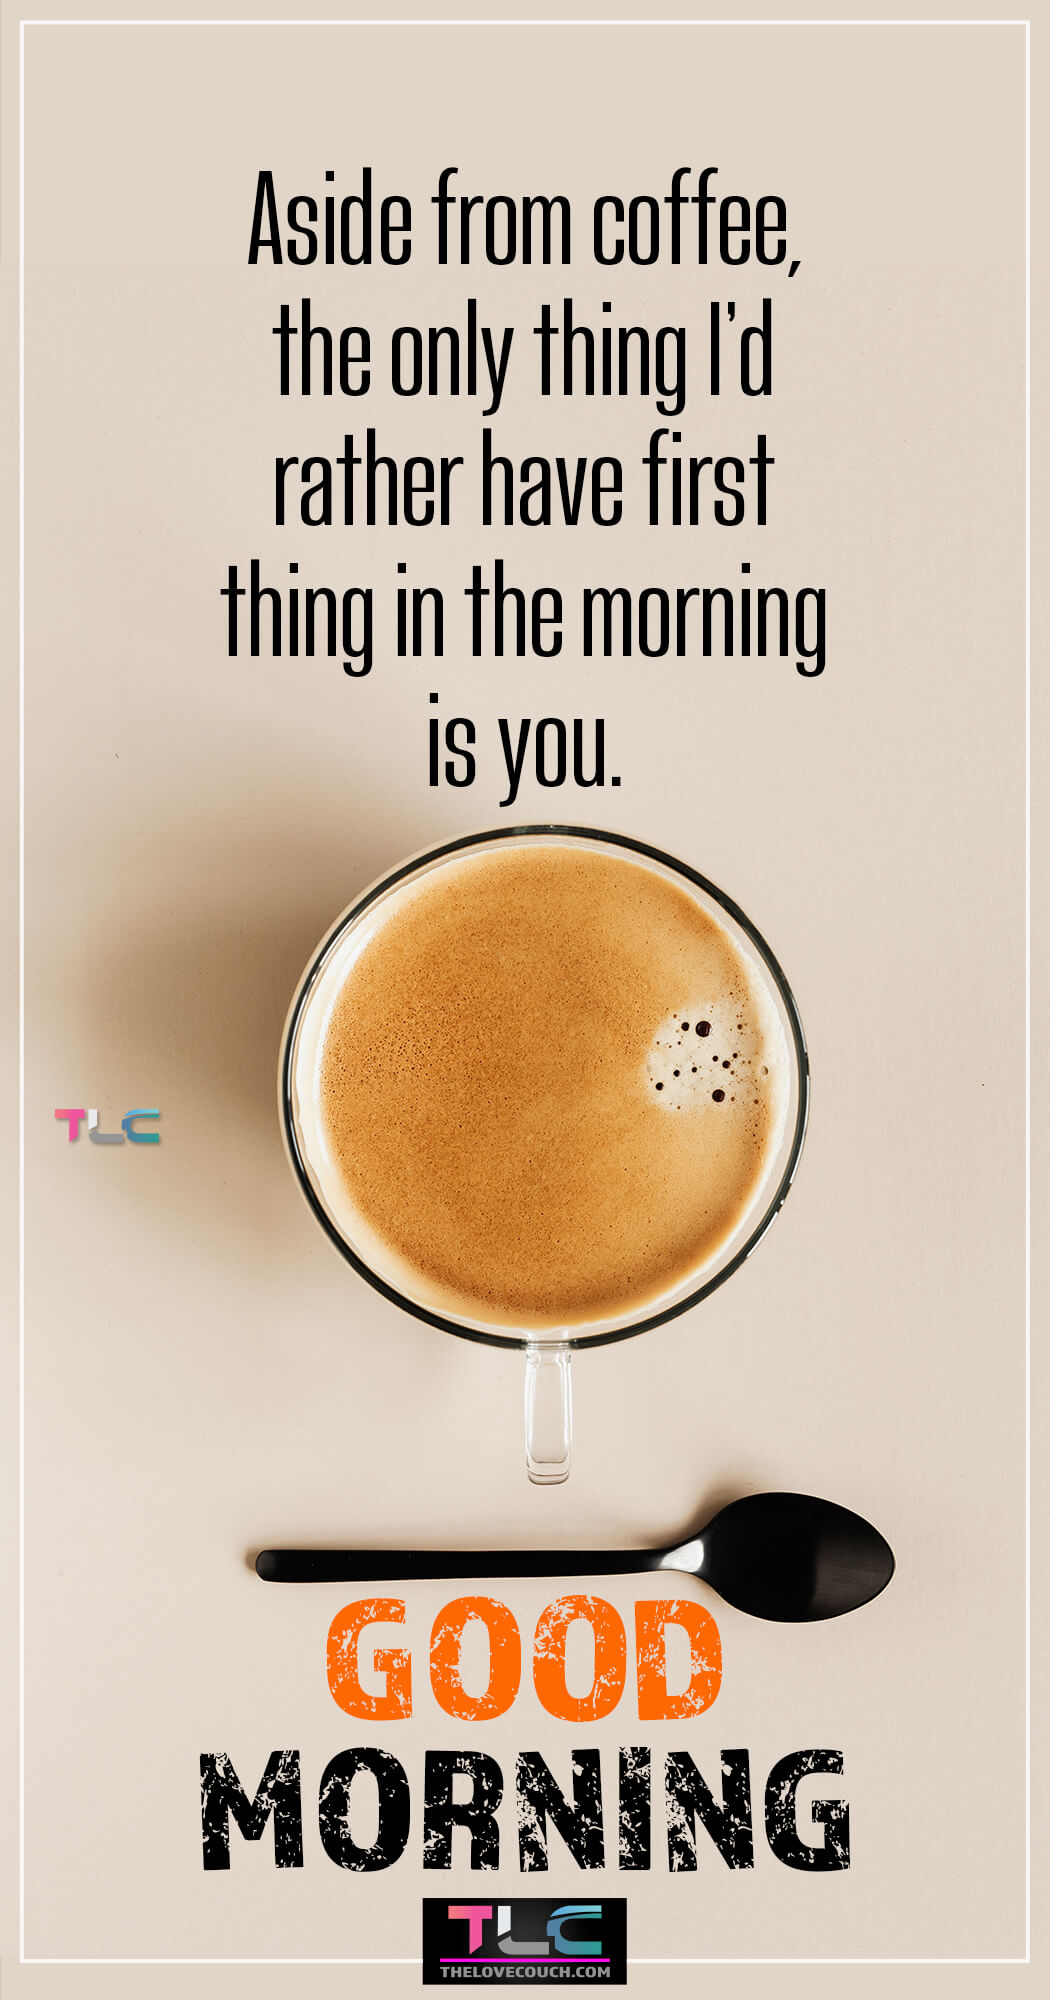 Aside from coffee, the only thing I’d rather have first thing in the morning is you. - Good Morning Pictures